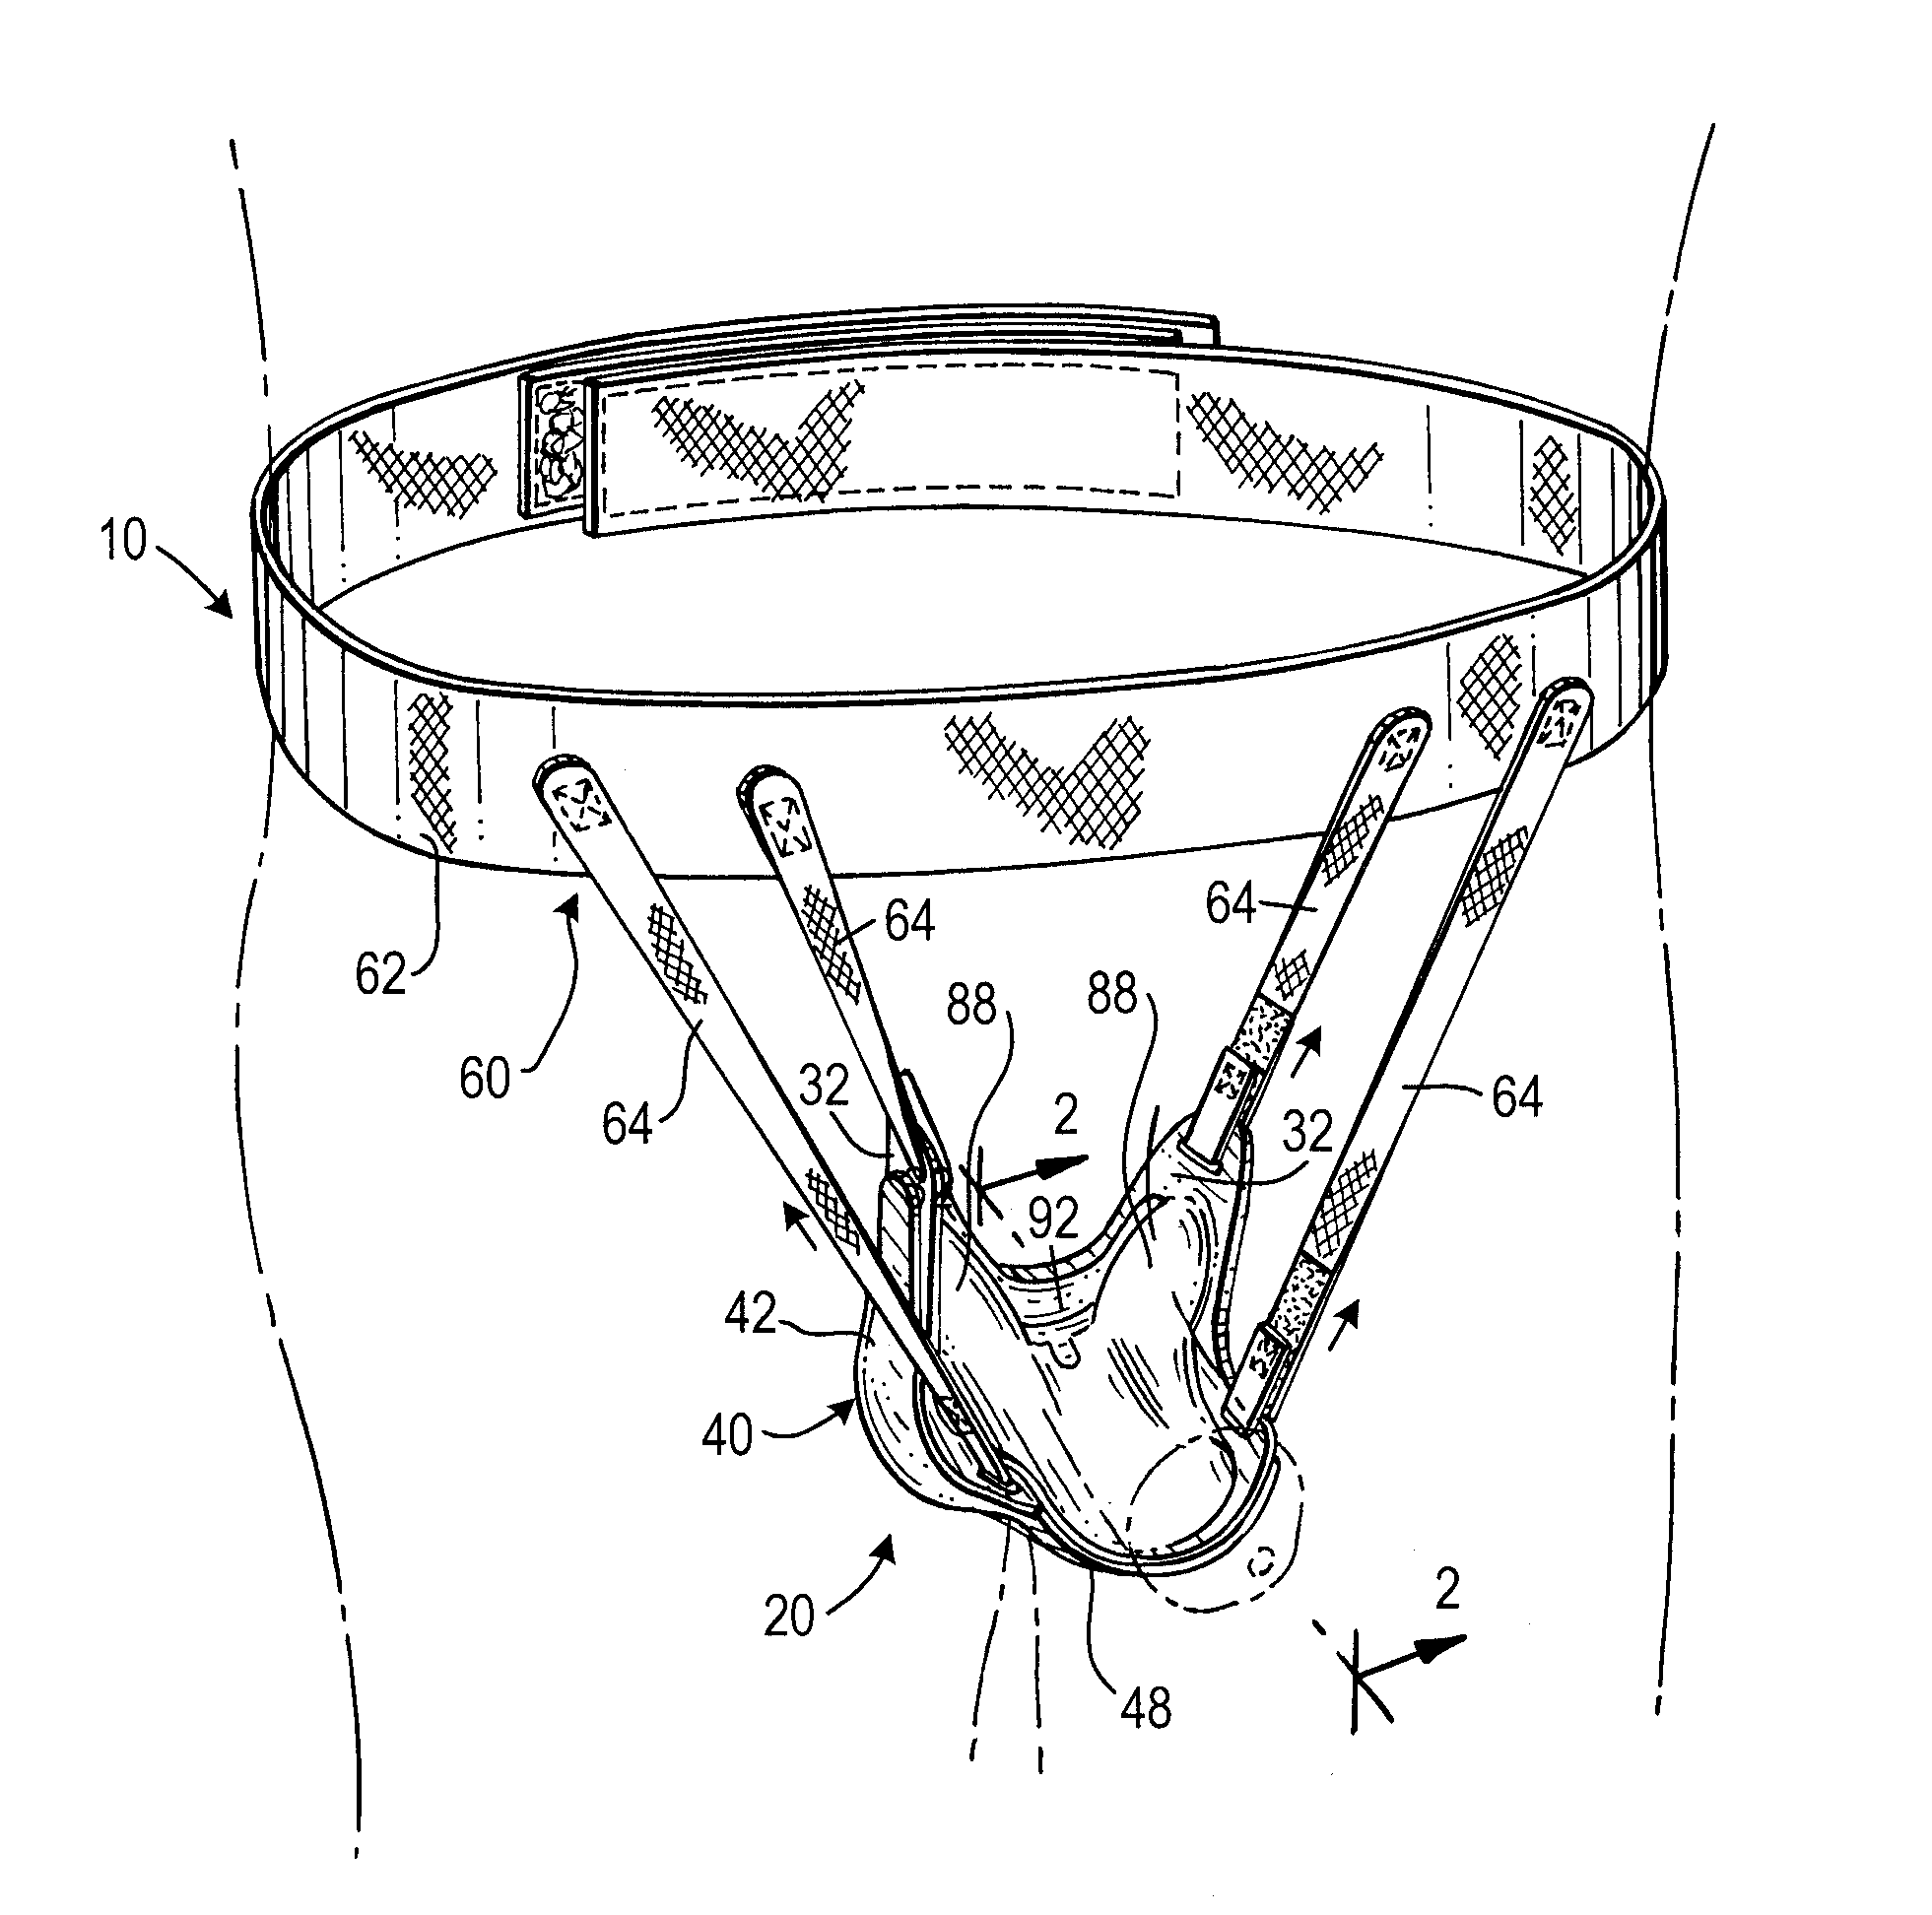 Apparatus and method for thermal therapy treatment to male genitalia